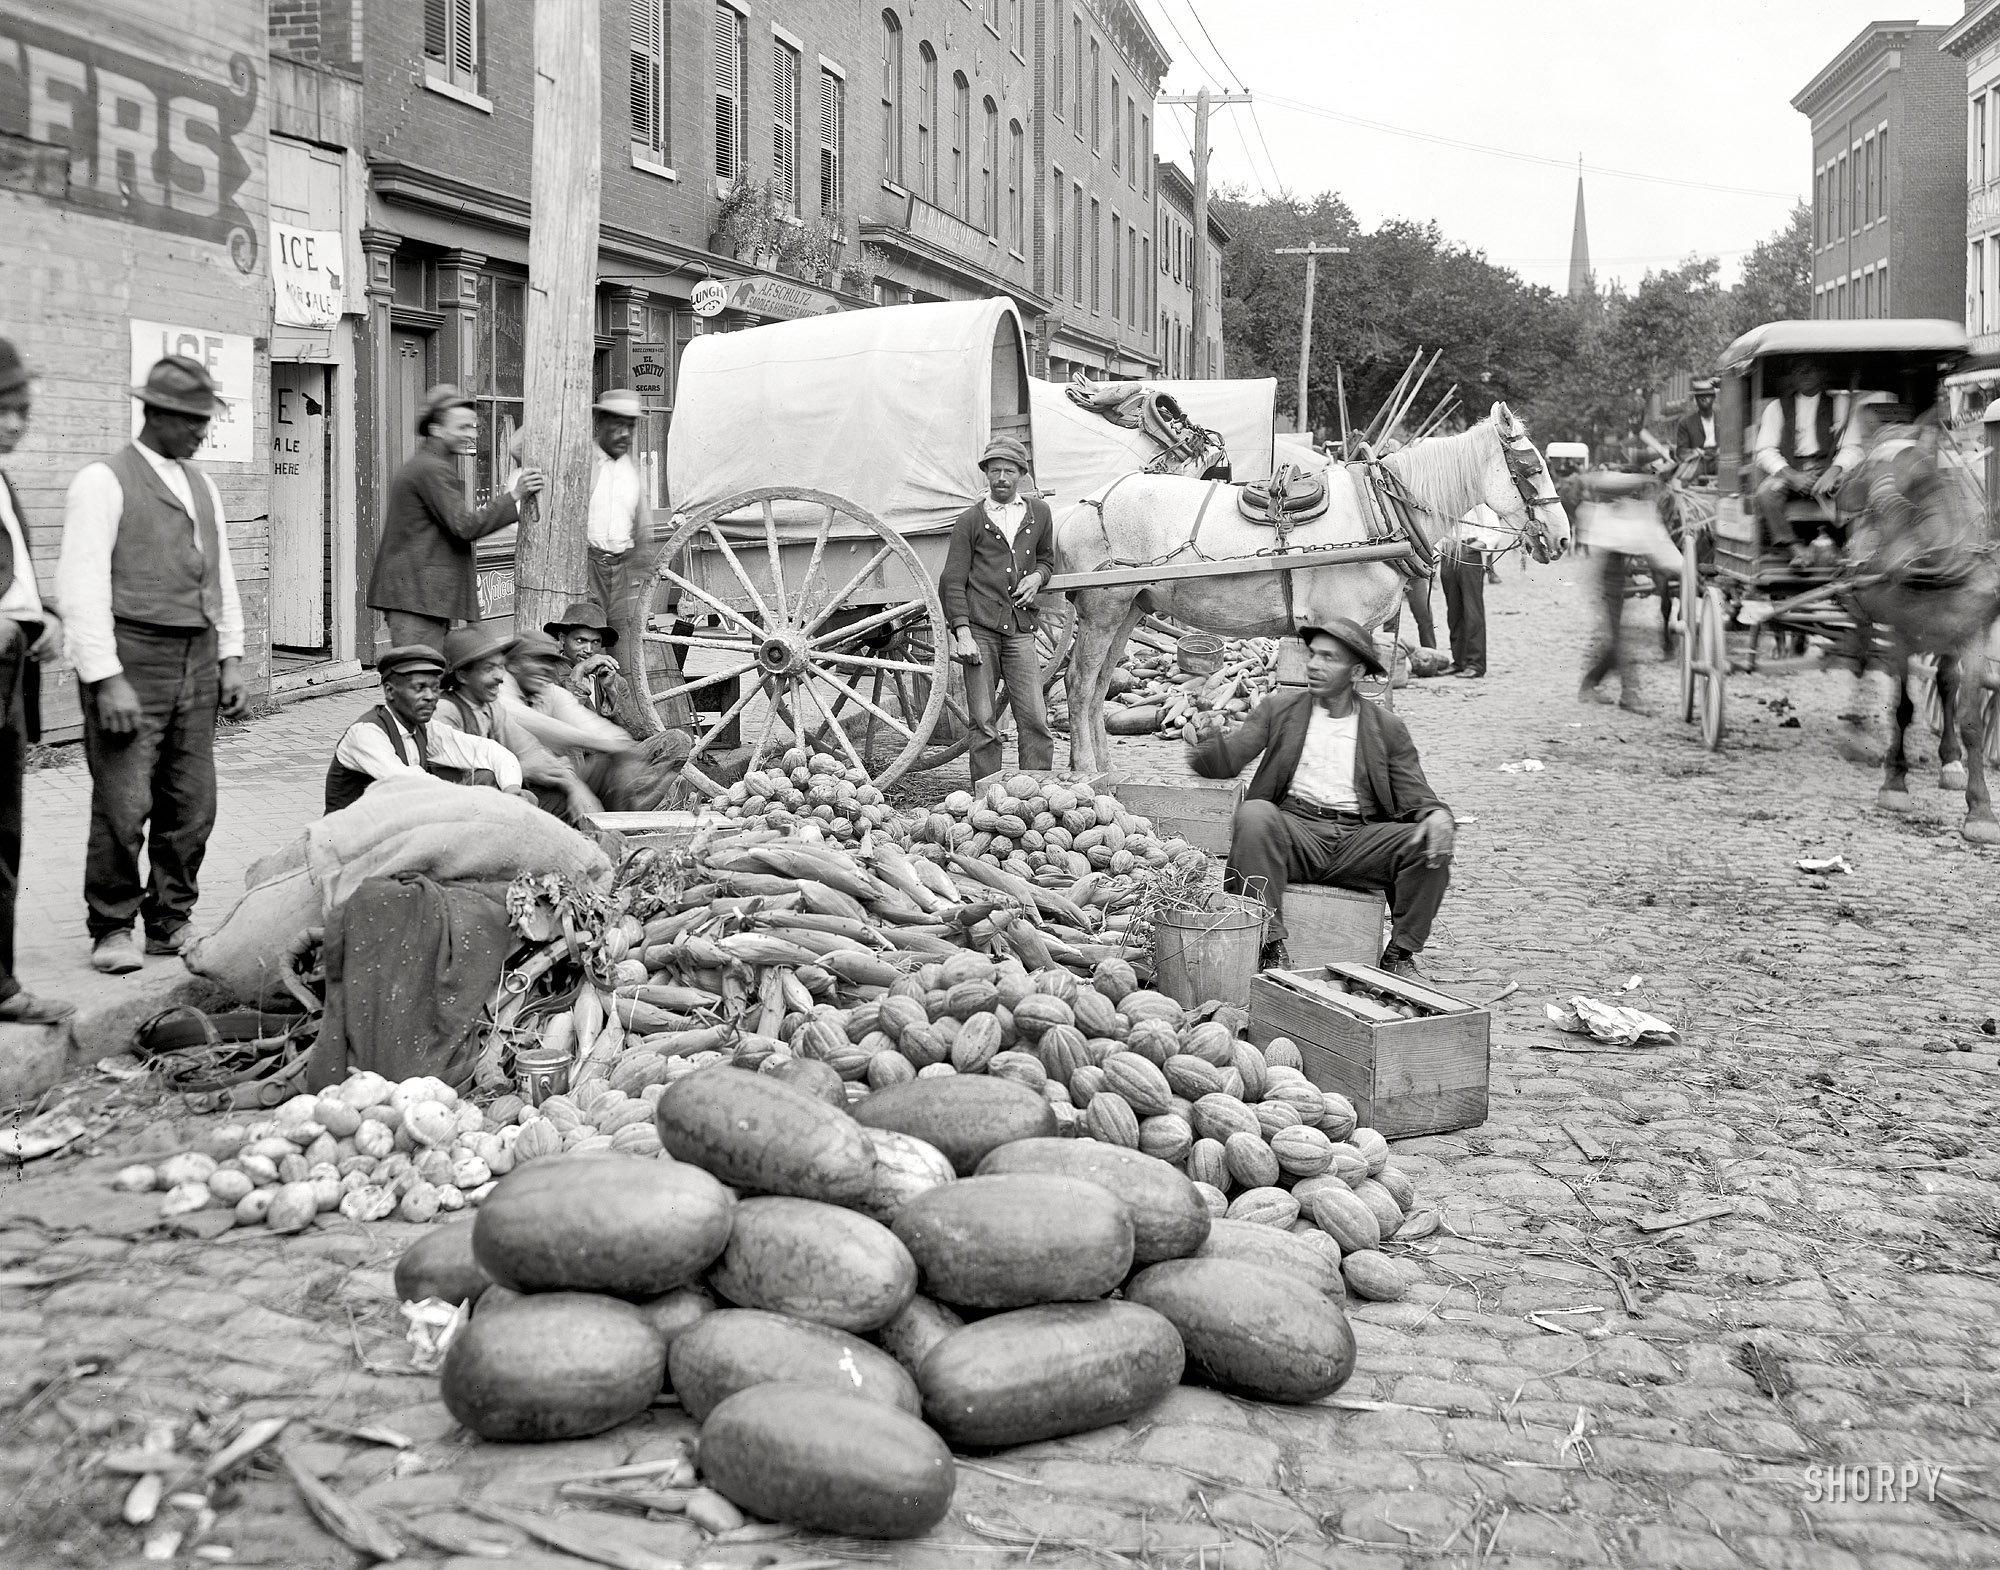 Richmond, Virginia, circa 1908. "Sixth Street Market (typical vegetable men)." 8x10 inch dry plate glass negative, Detroit Publishing Company. View full size.